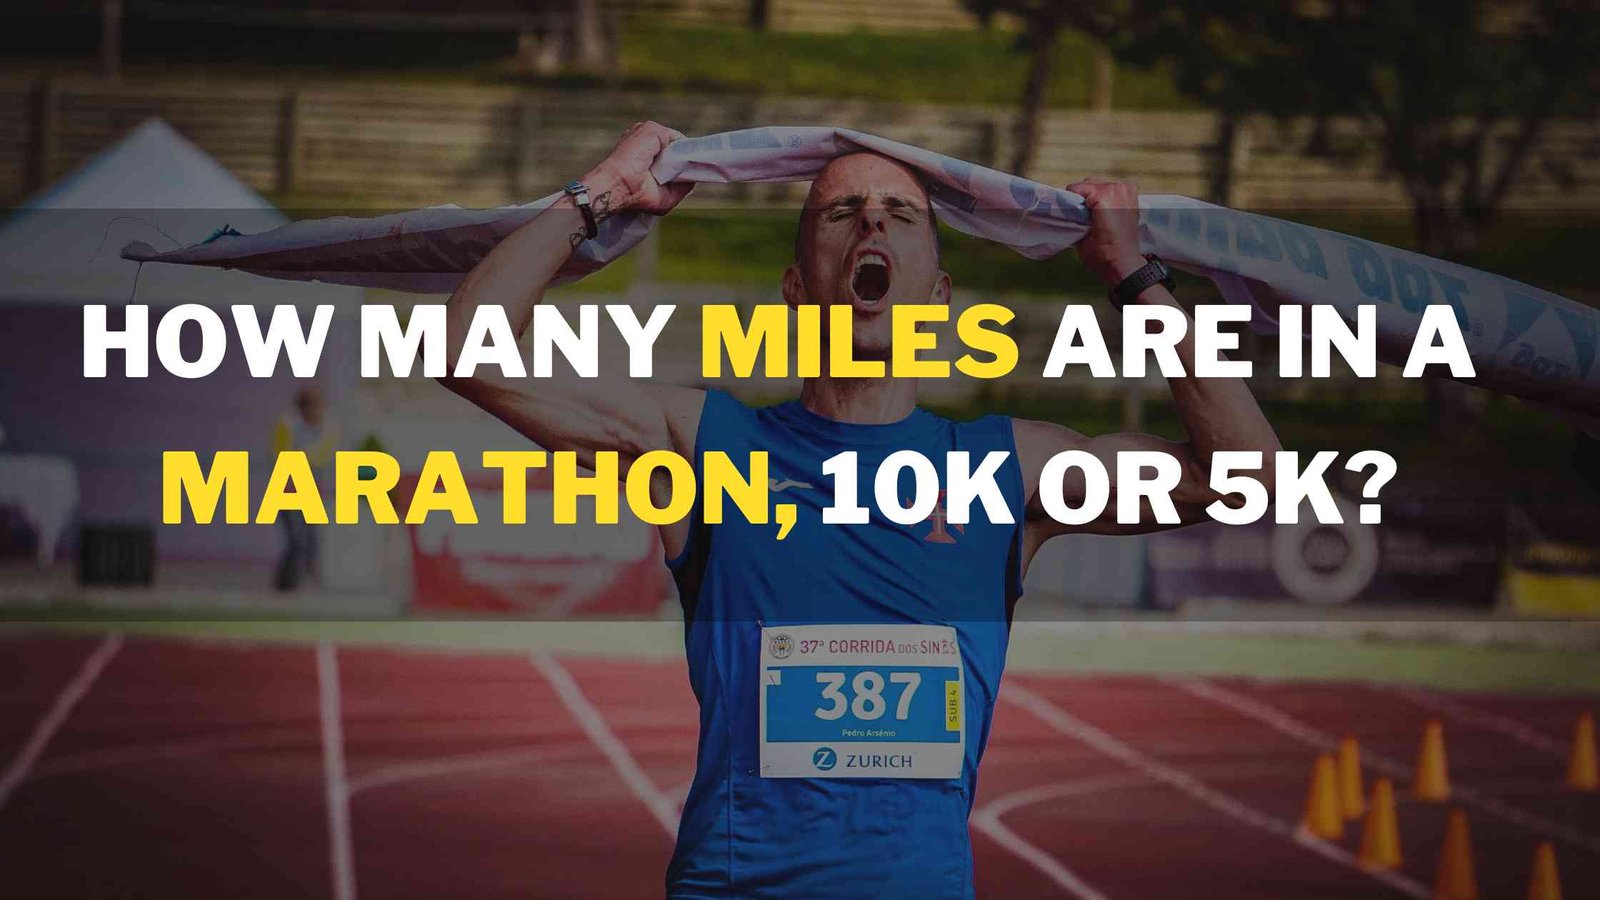 How many miles are in a marathon